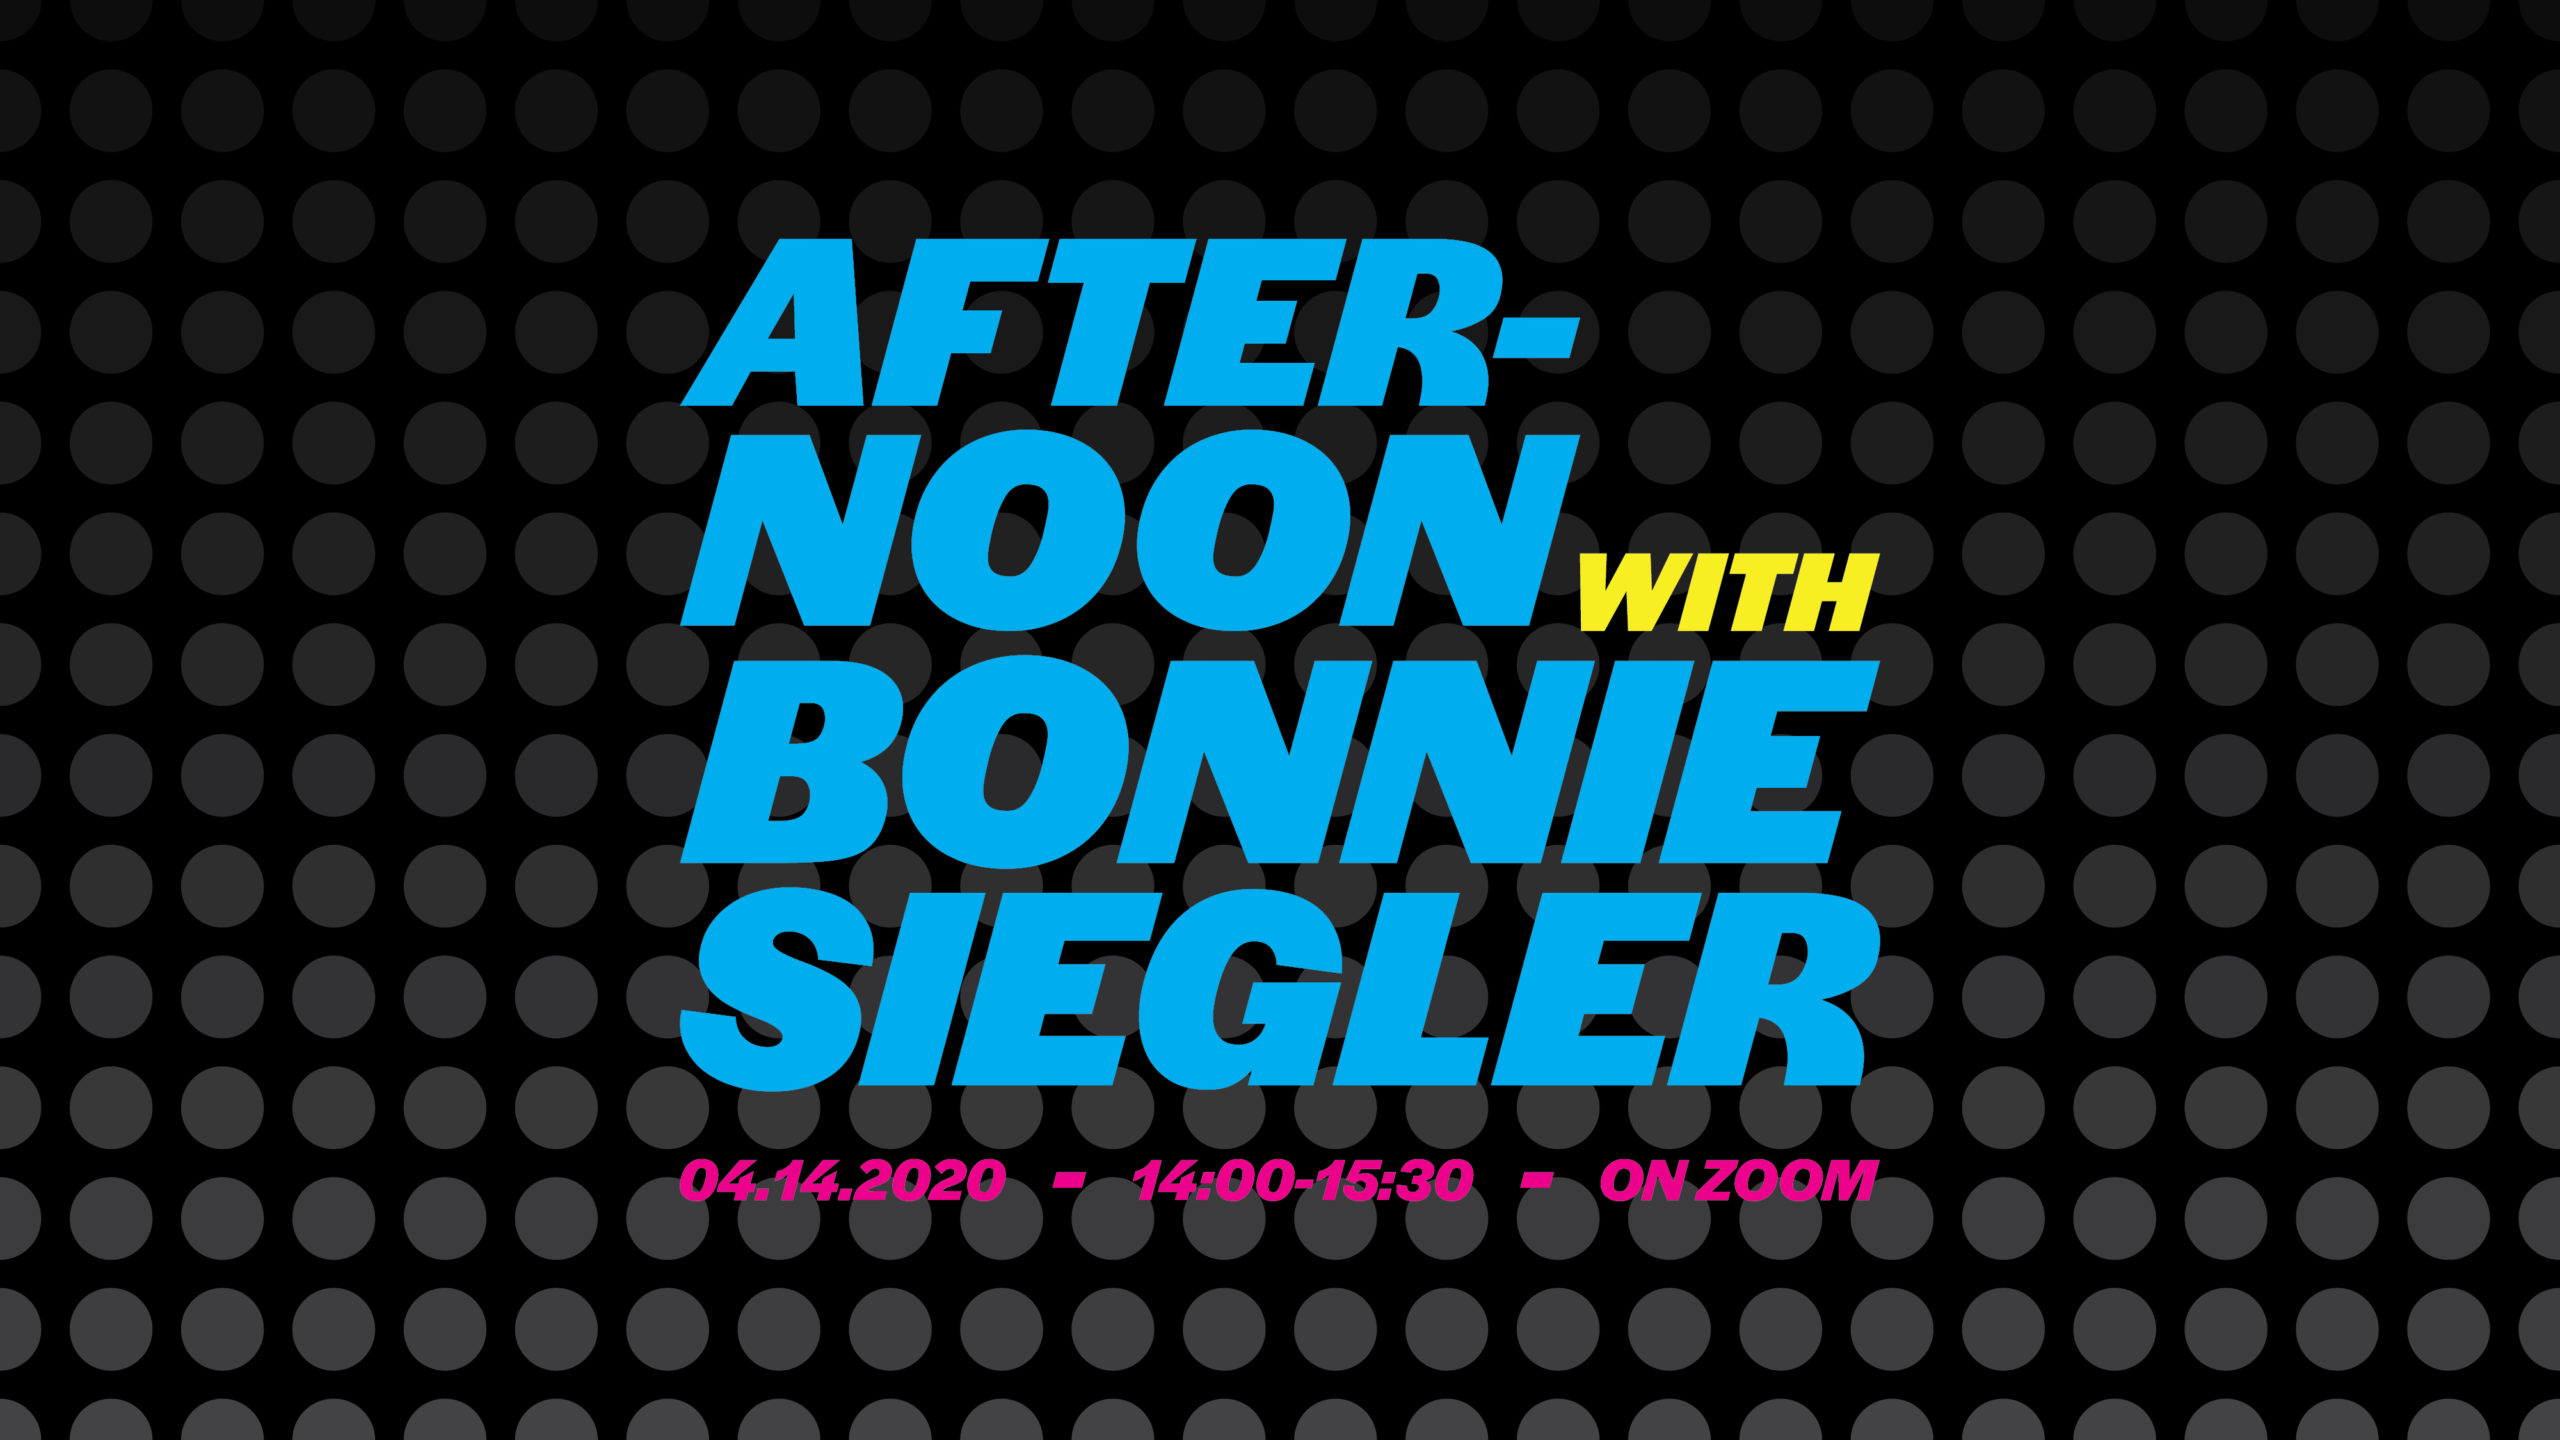 Afternoon with Bonnie Siegler; lecture title